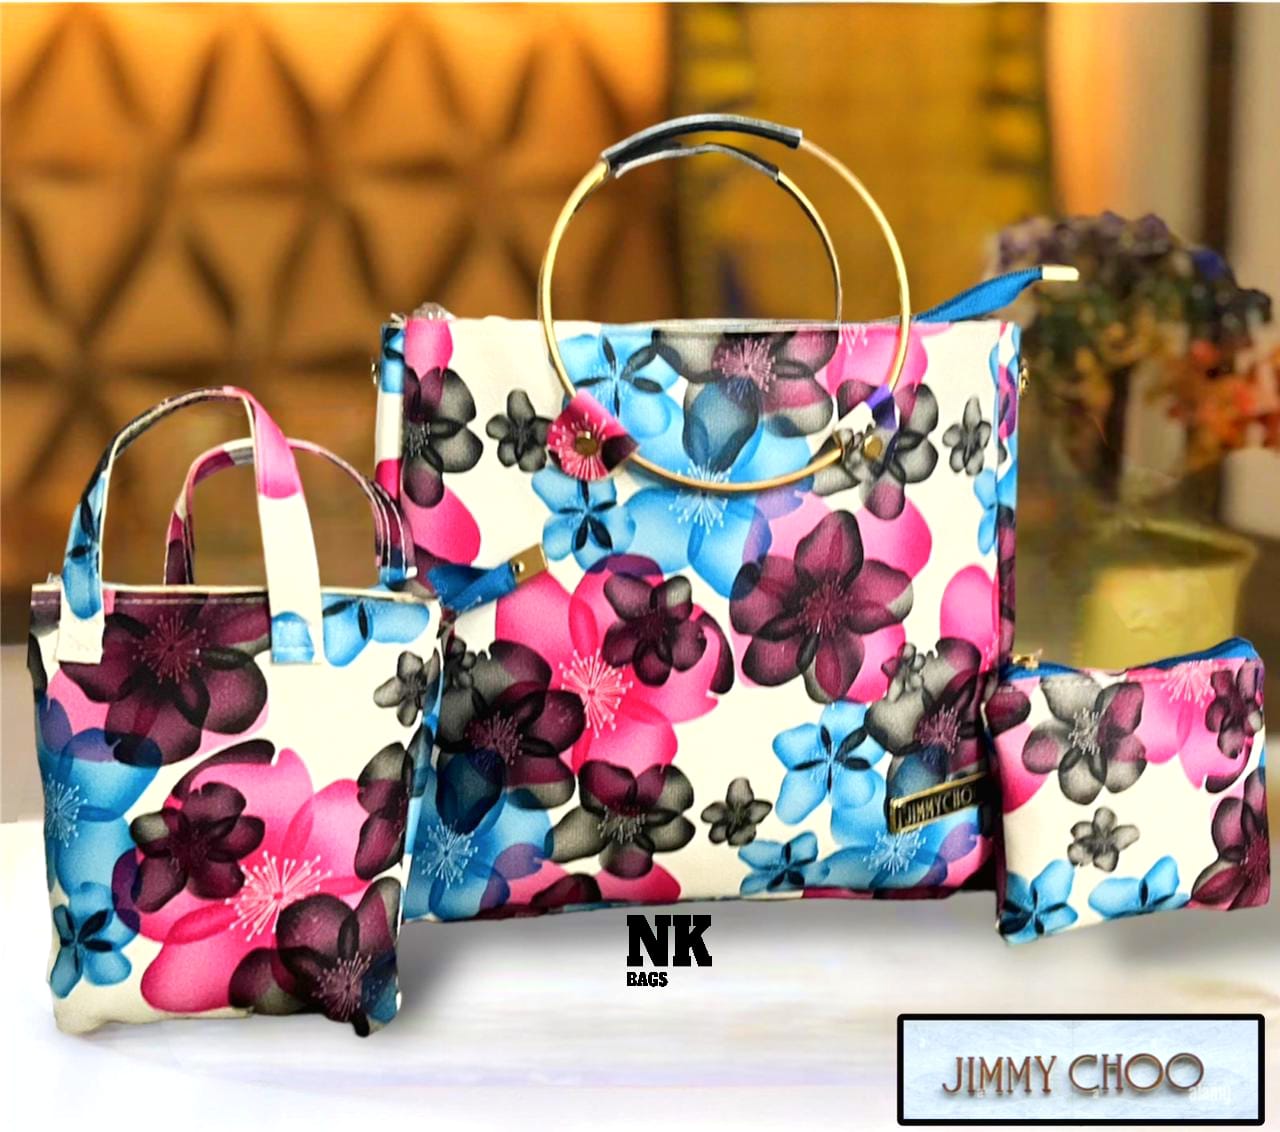 1030D. JIMMY CHOO purse, 3 pc combo, Round steel dual handle, flowery printed. Size